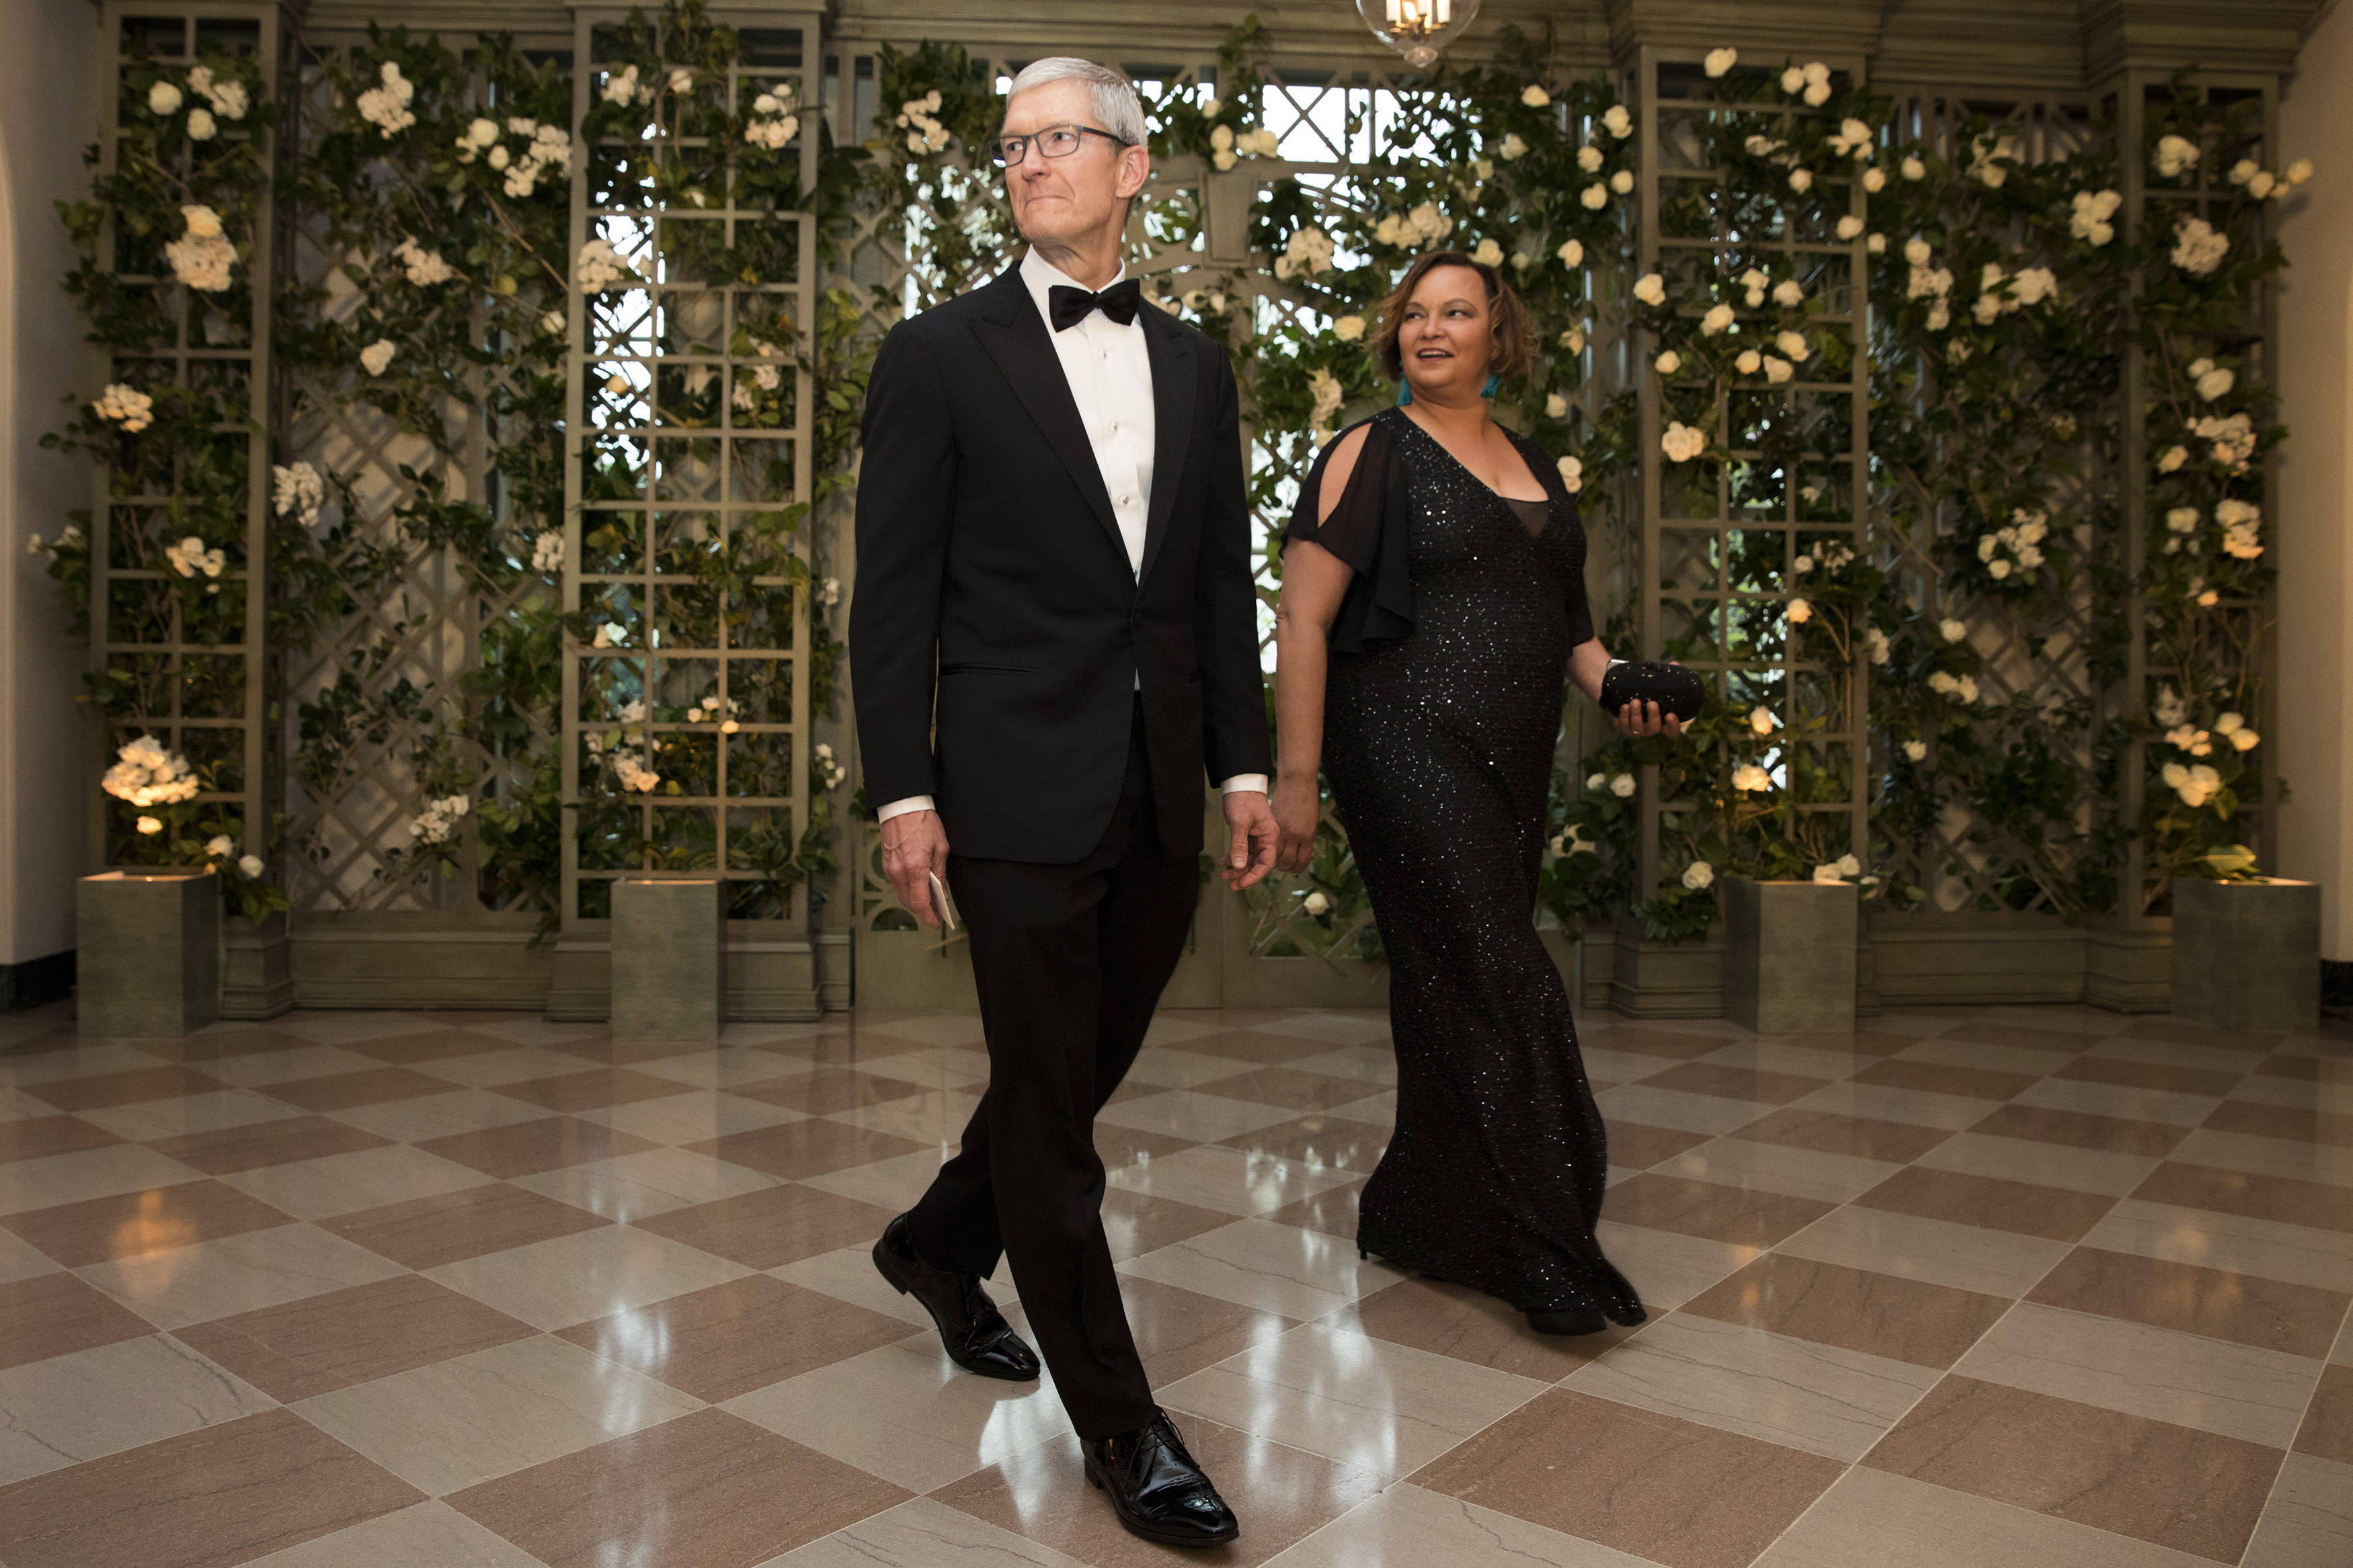 WASHINGTON, DC - APRIL 24: Apple CEO Tim Cook and Lisa Jackson arrive at the White House for a state dinner April 24, 2018 in Washington, DC. (Photo by Aaron P. Bernstein/Getty Images)